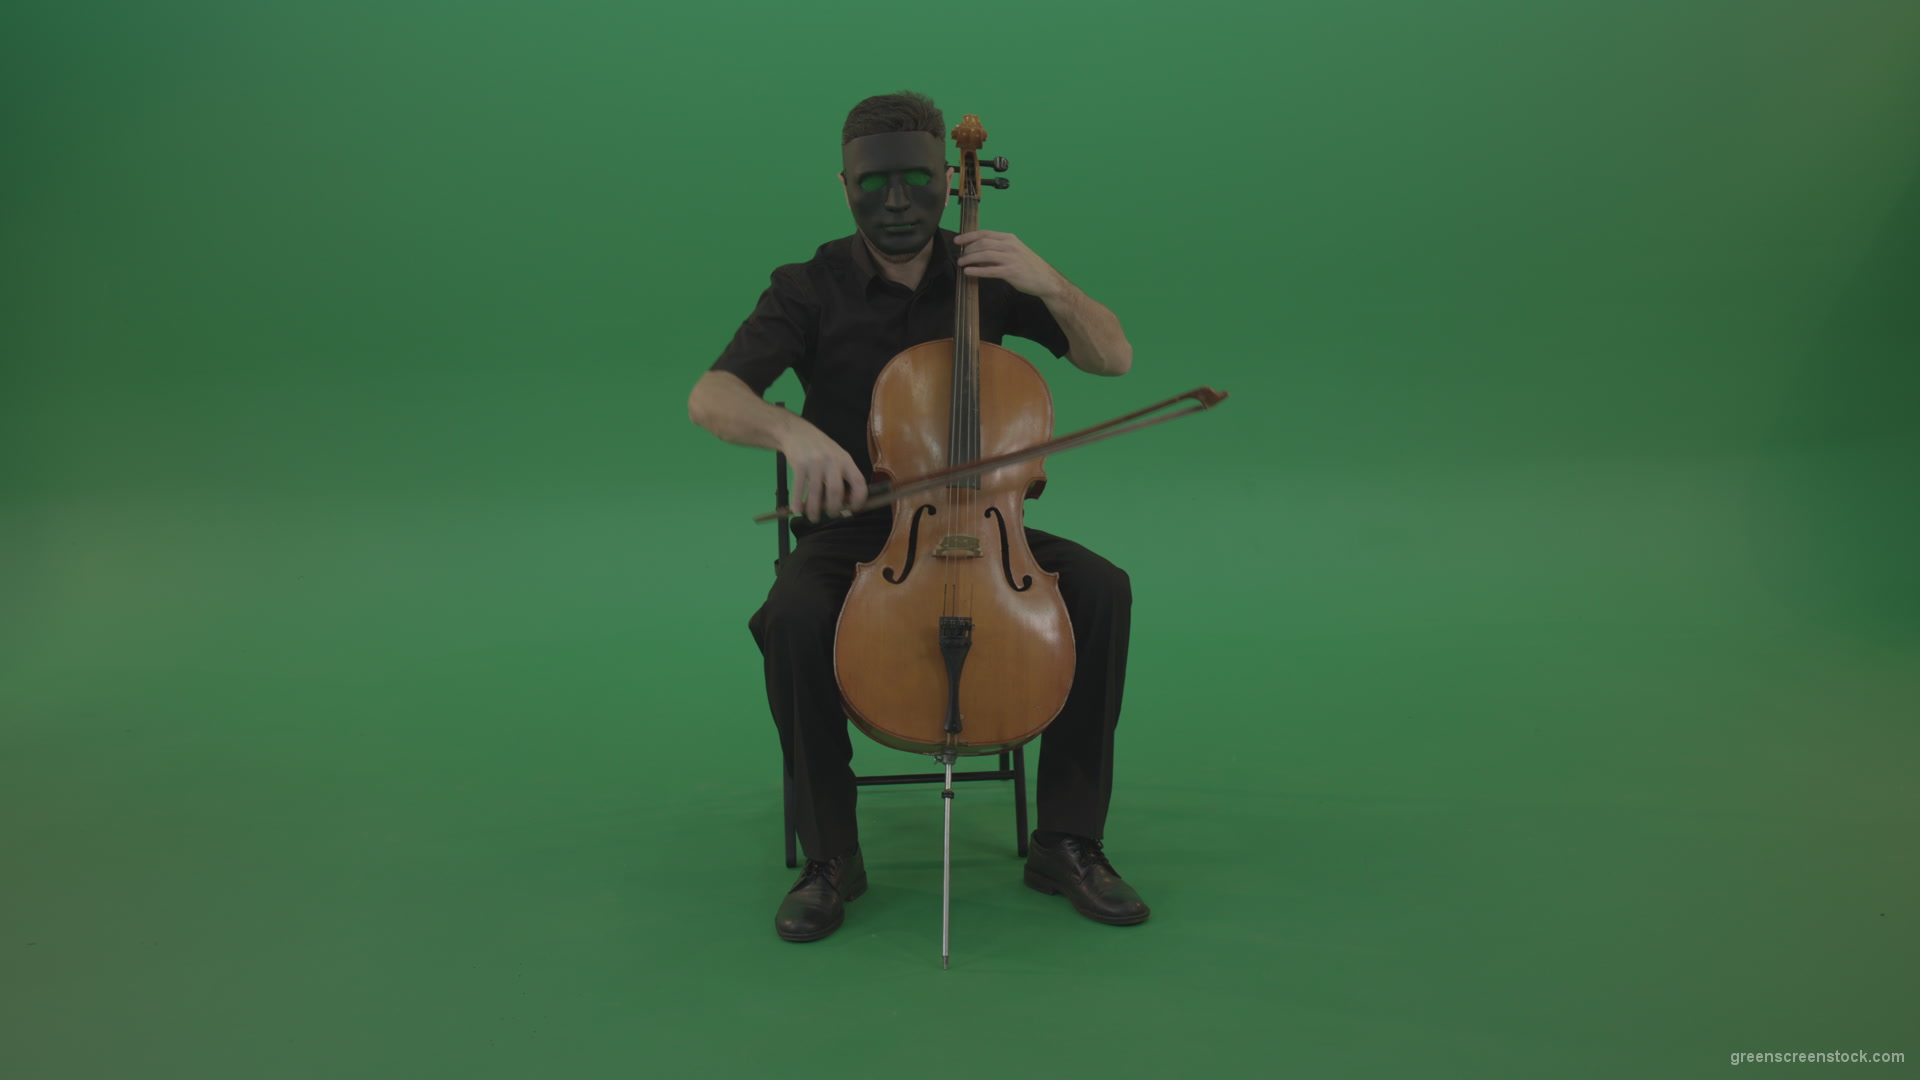 Full-size-man-in-black-wear-and-mask-play-violoncello-cello-strings-music-instrument-isolated-on-green-screen_002 Green Screen Stock